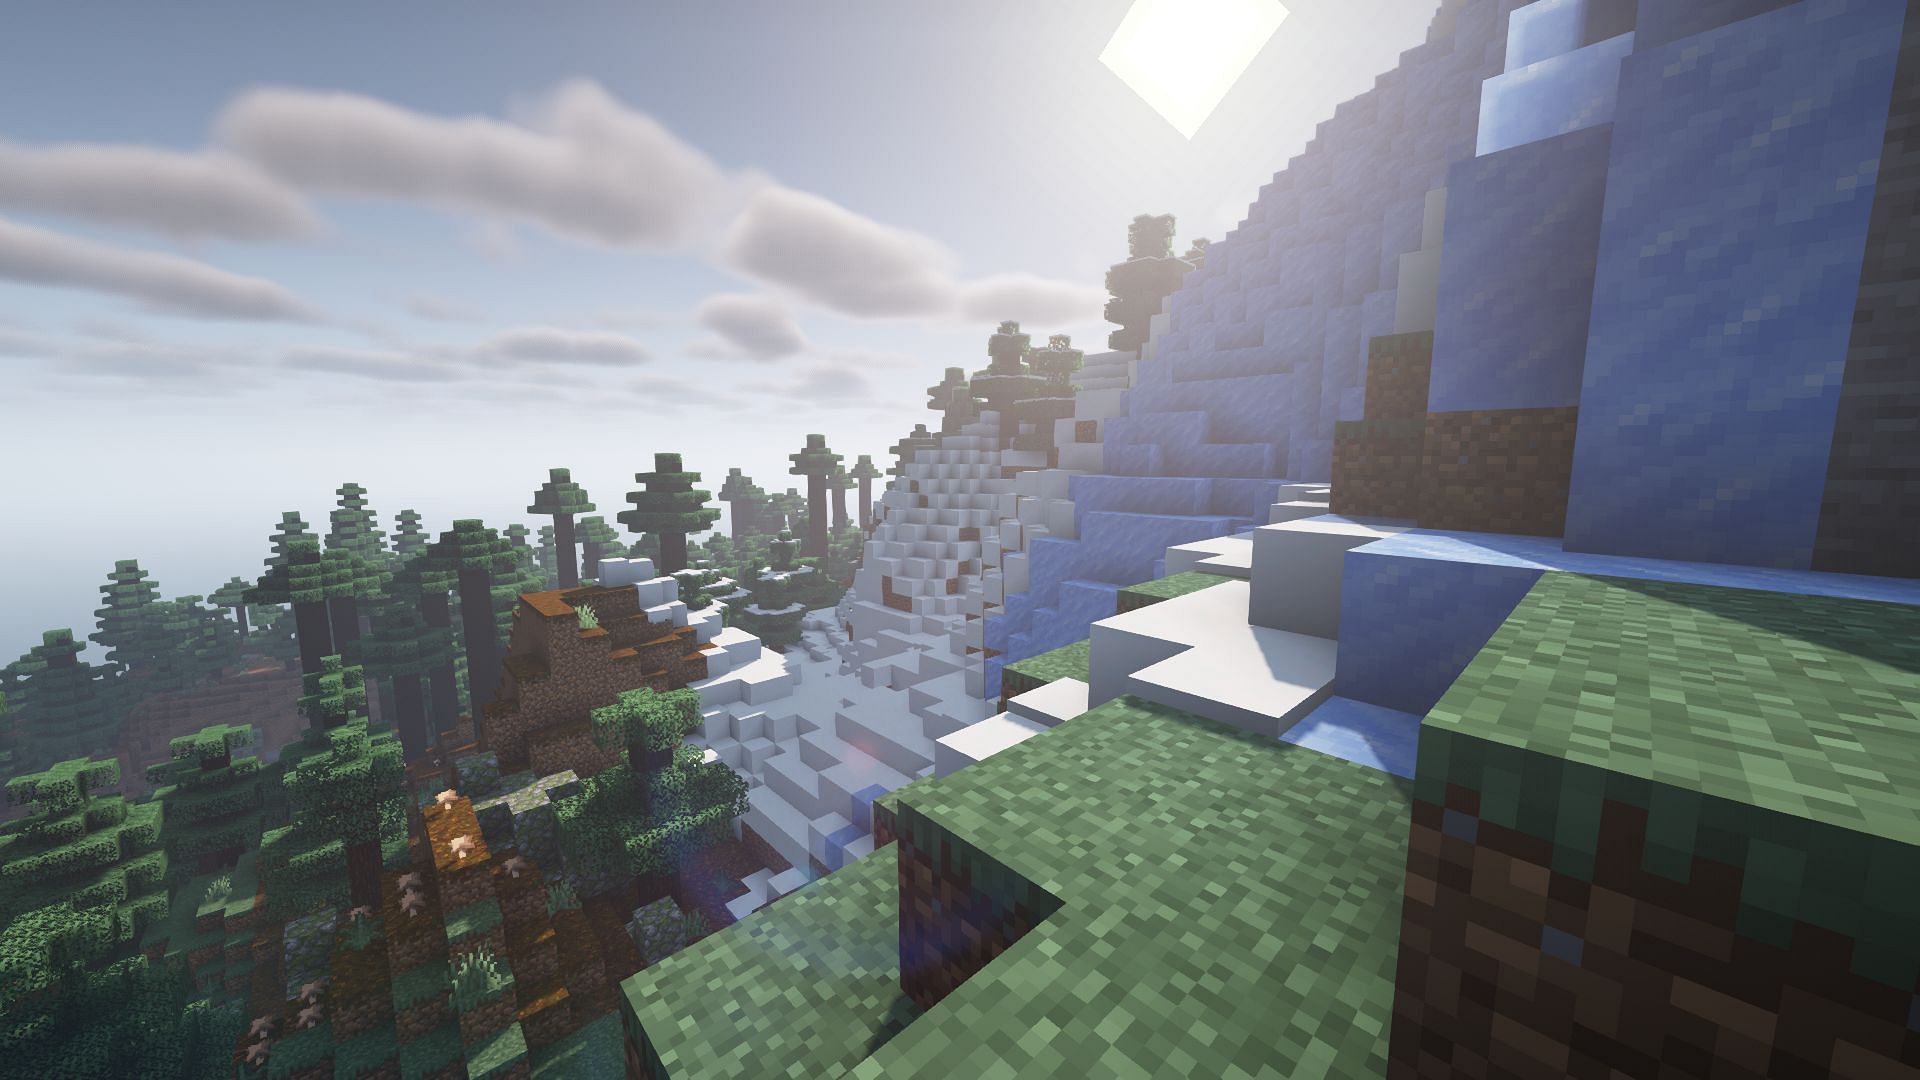 BSL Shaders is also a popular choice in the Minecraft community as they offer basic shader features (Image via Mojang)